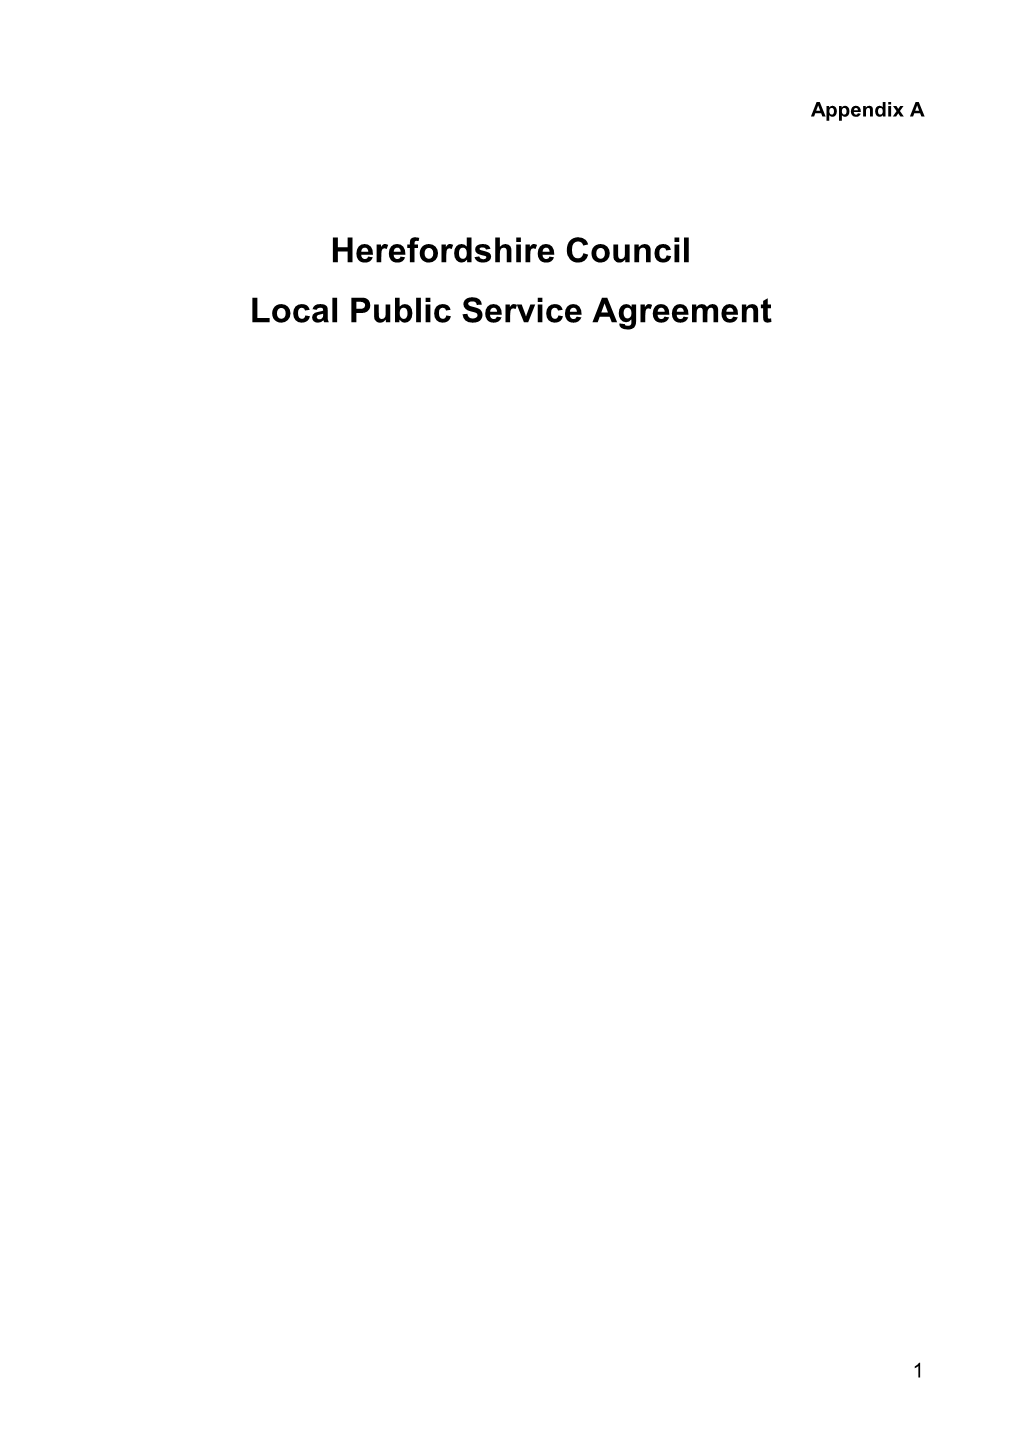 Herefordshire Council Local Public Service Agreement